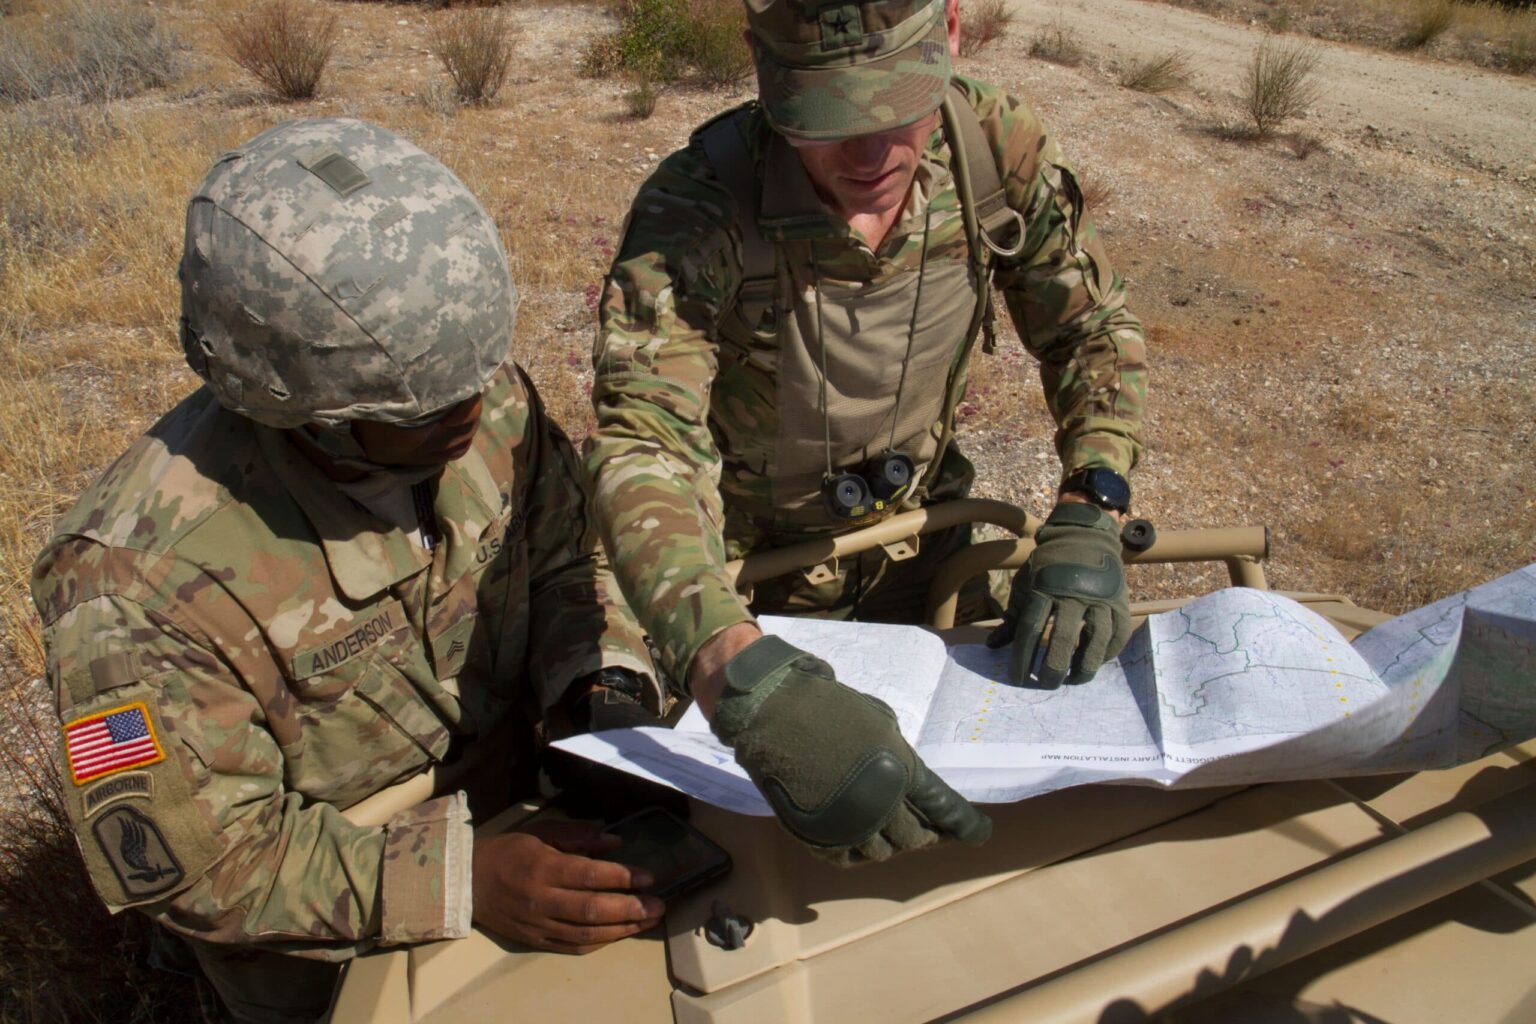 FORT HUNTER LIGGETT-- U.S. Army Reserve Soldier Sgt. Anthony Anderson (Left), 91st Training Division, Fort Hunter Liggett, California and Brig. Gen. W. Shane Buzza, Commanding General, 91st Training Division, Fort Hunter Liggett, California review a map to determine whether a units placement will hinder unit performance during CSTX 91-18-01, at Fort Hunter Liggett, California, July 12, 2018. CSTX 91-18-01 is a Combat Support Training Exercise that ensures America’s Army Reserve units and Soldiers are trained and ready to deploy and bring capable, combat-ready, and lethal firepower in support of the Army and our joint partners anywhere in the world.